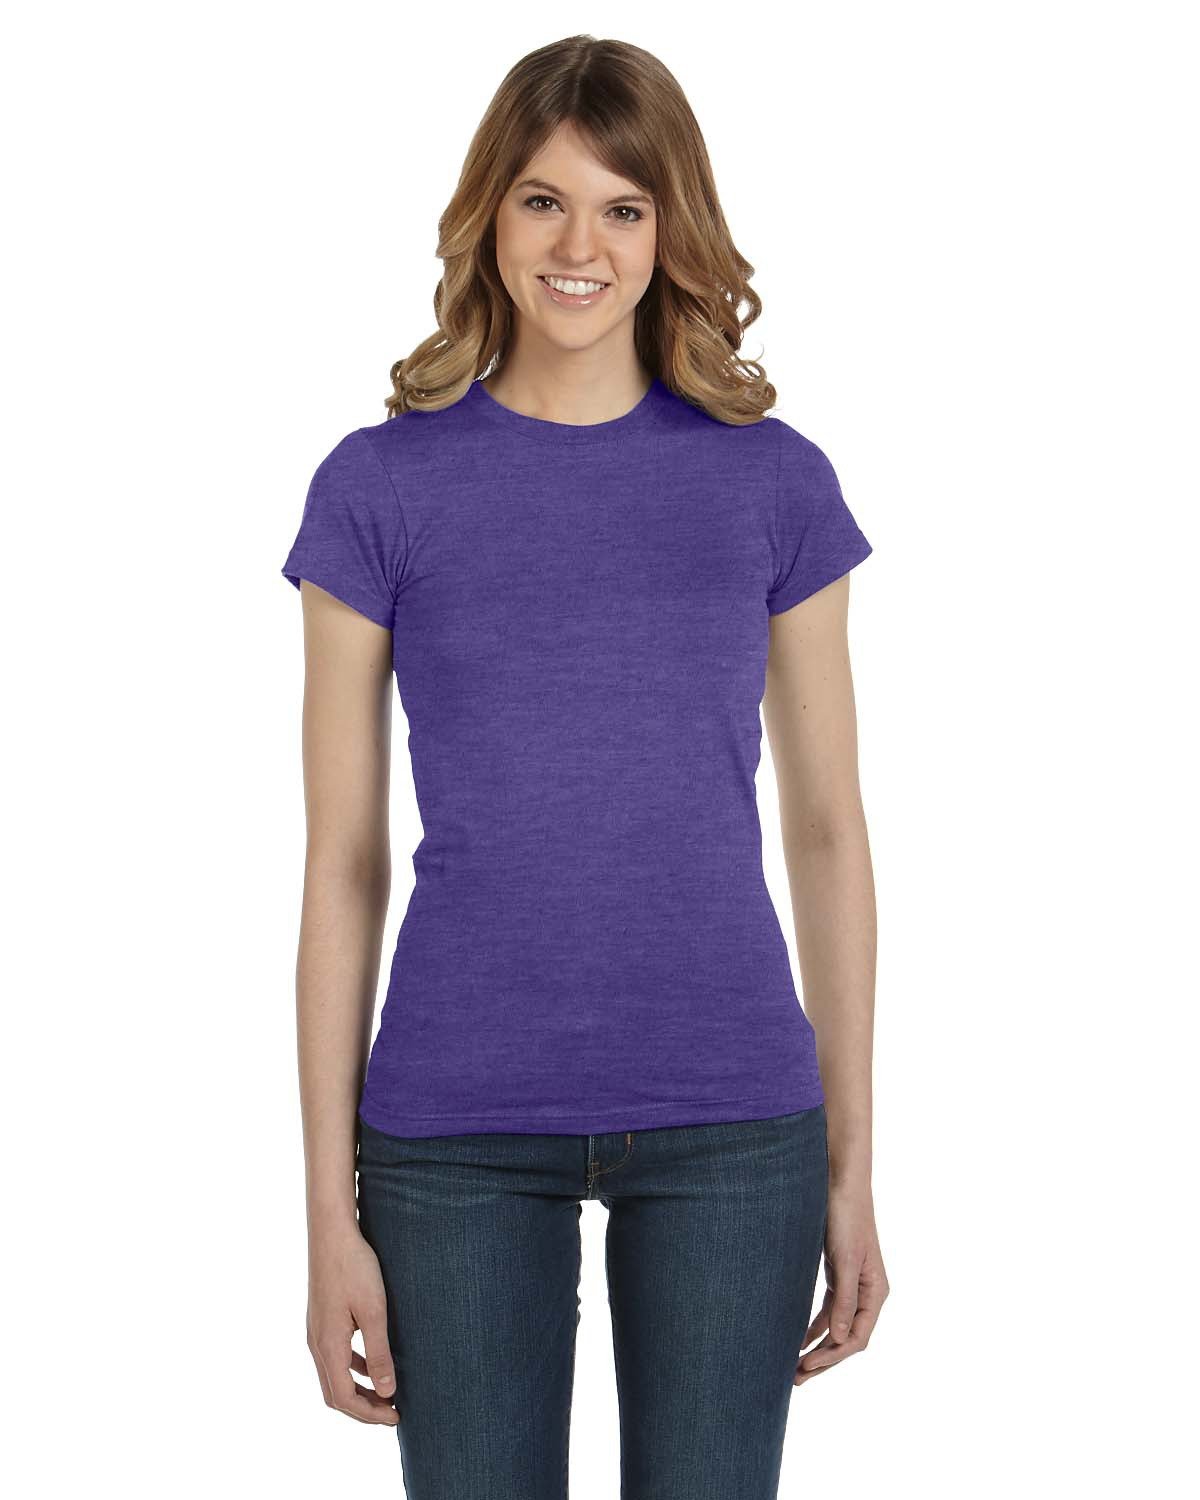 Anvil Ladies' Lightweight Fitted T-Shirt HEATHER PURPLE 